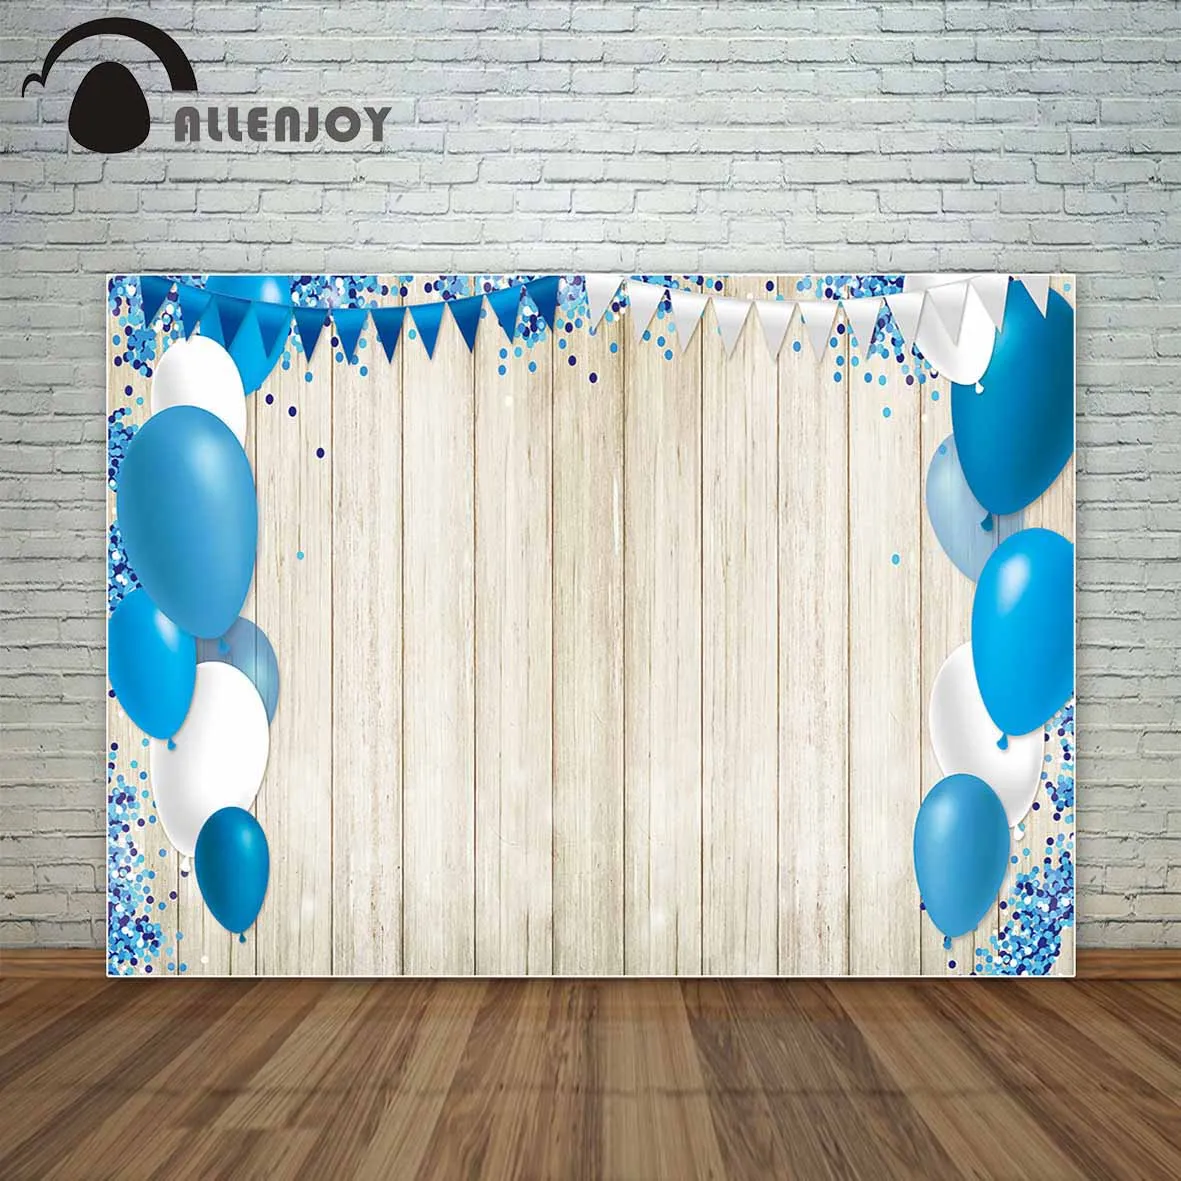 Allenjoy photo background Blue White balloons on wooden board backdrop  confetti party backdrop banners photography backdrops|photography  backdrops|photo backgroundphoto blue background - AliExpress